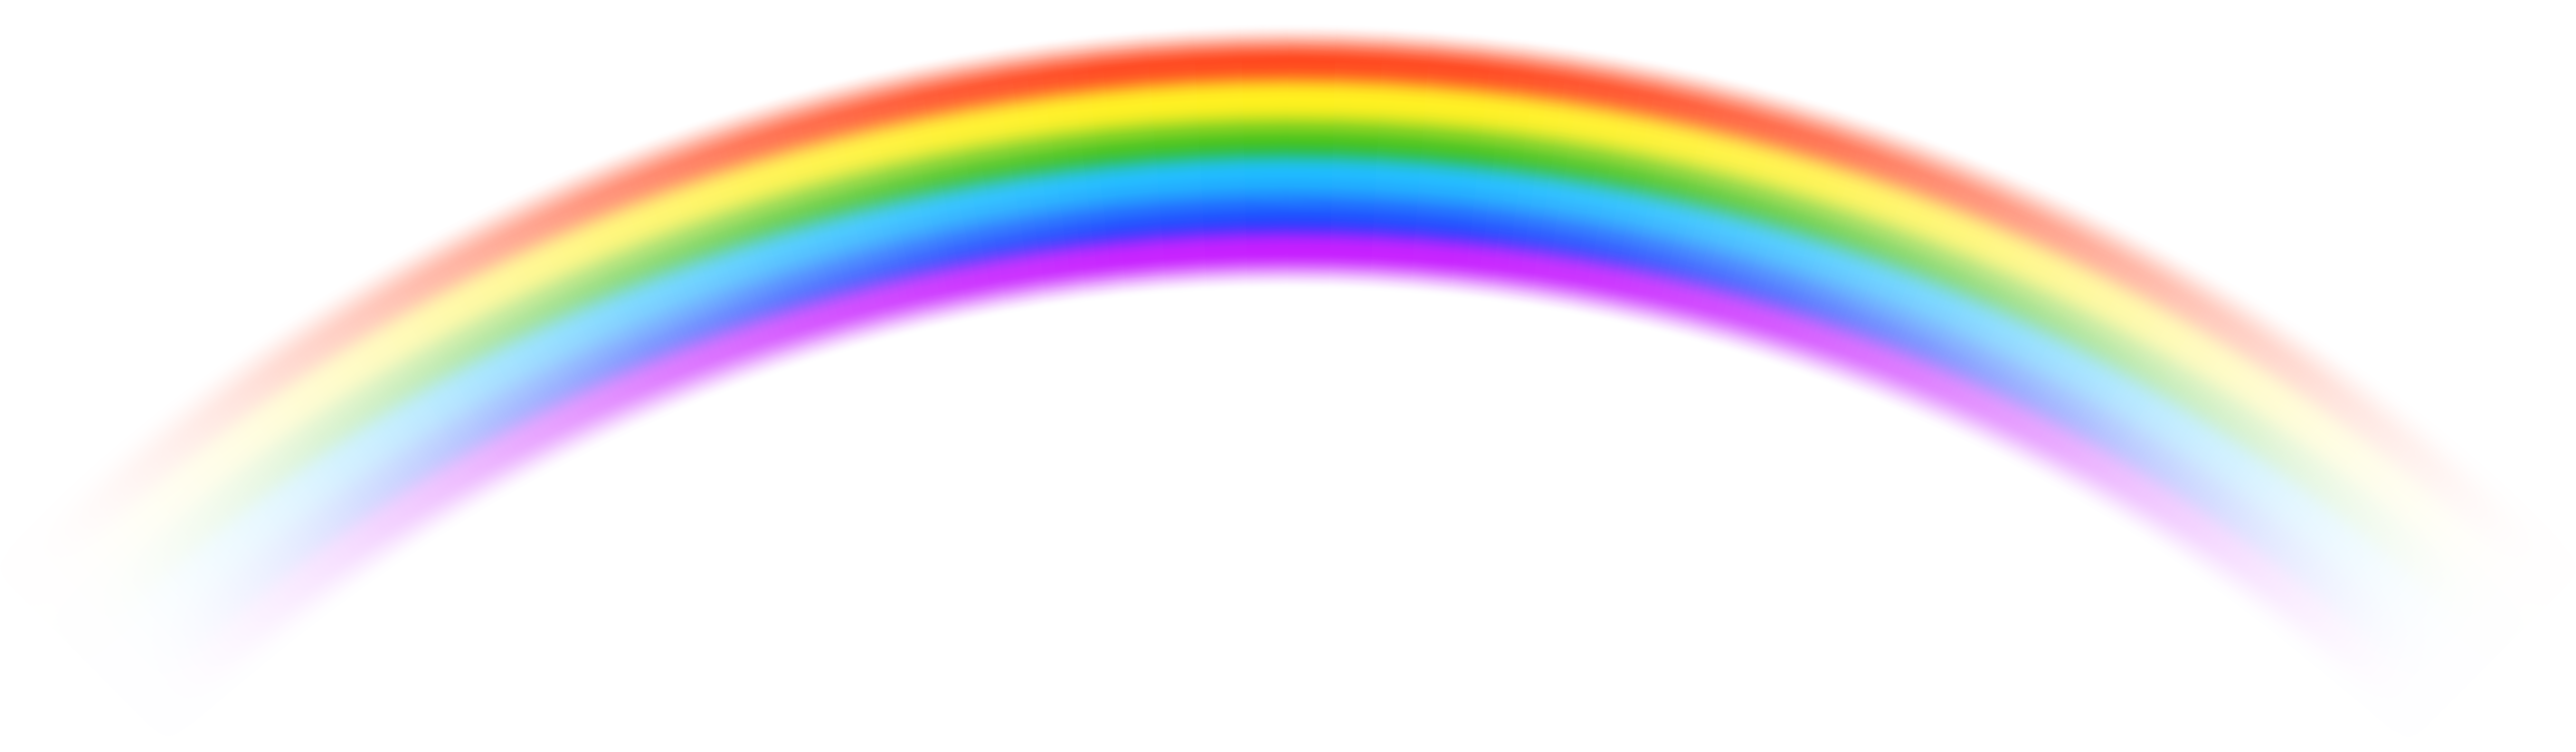 Waves clipart rainbow. Png free clip art